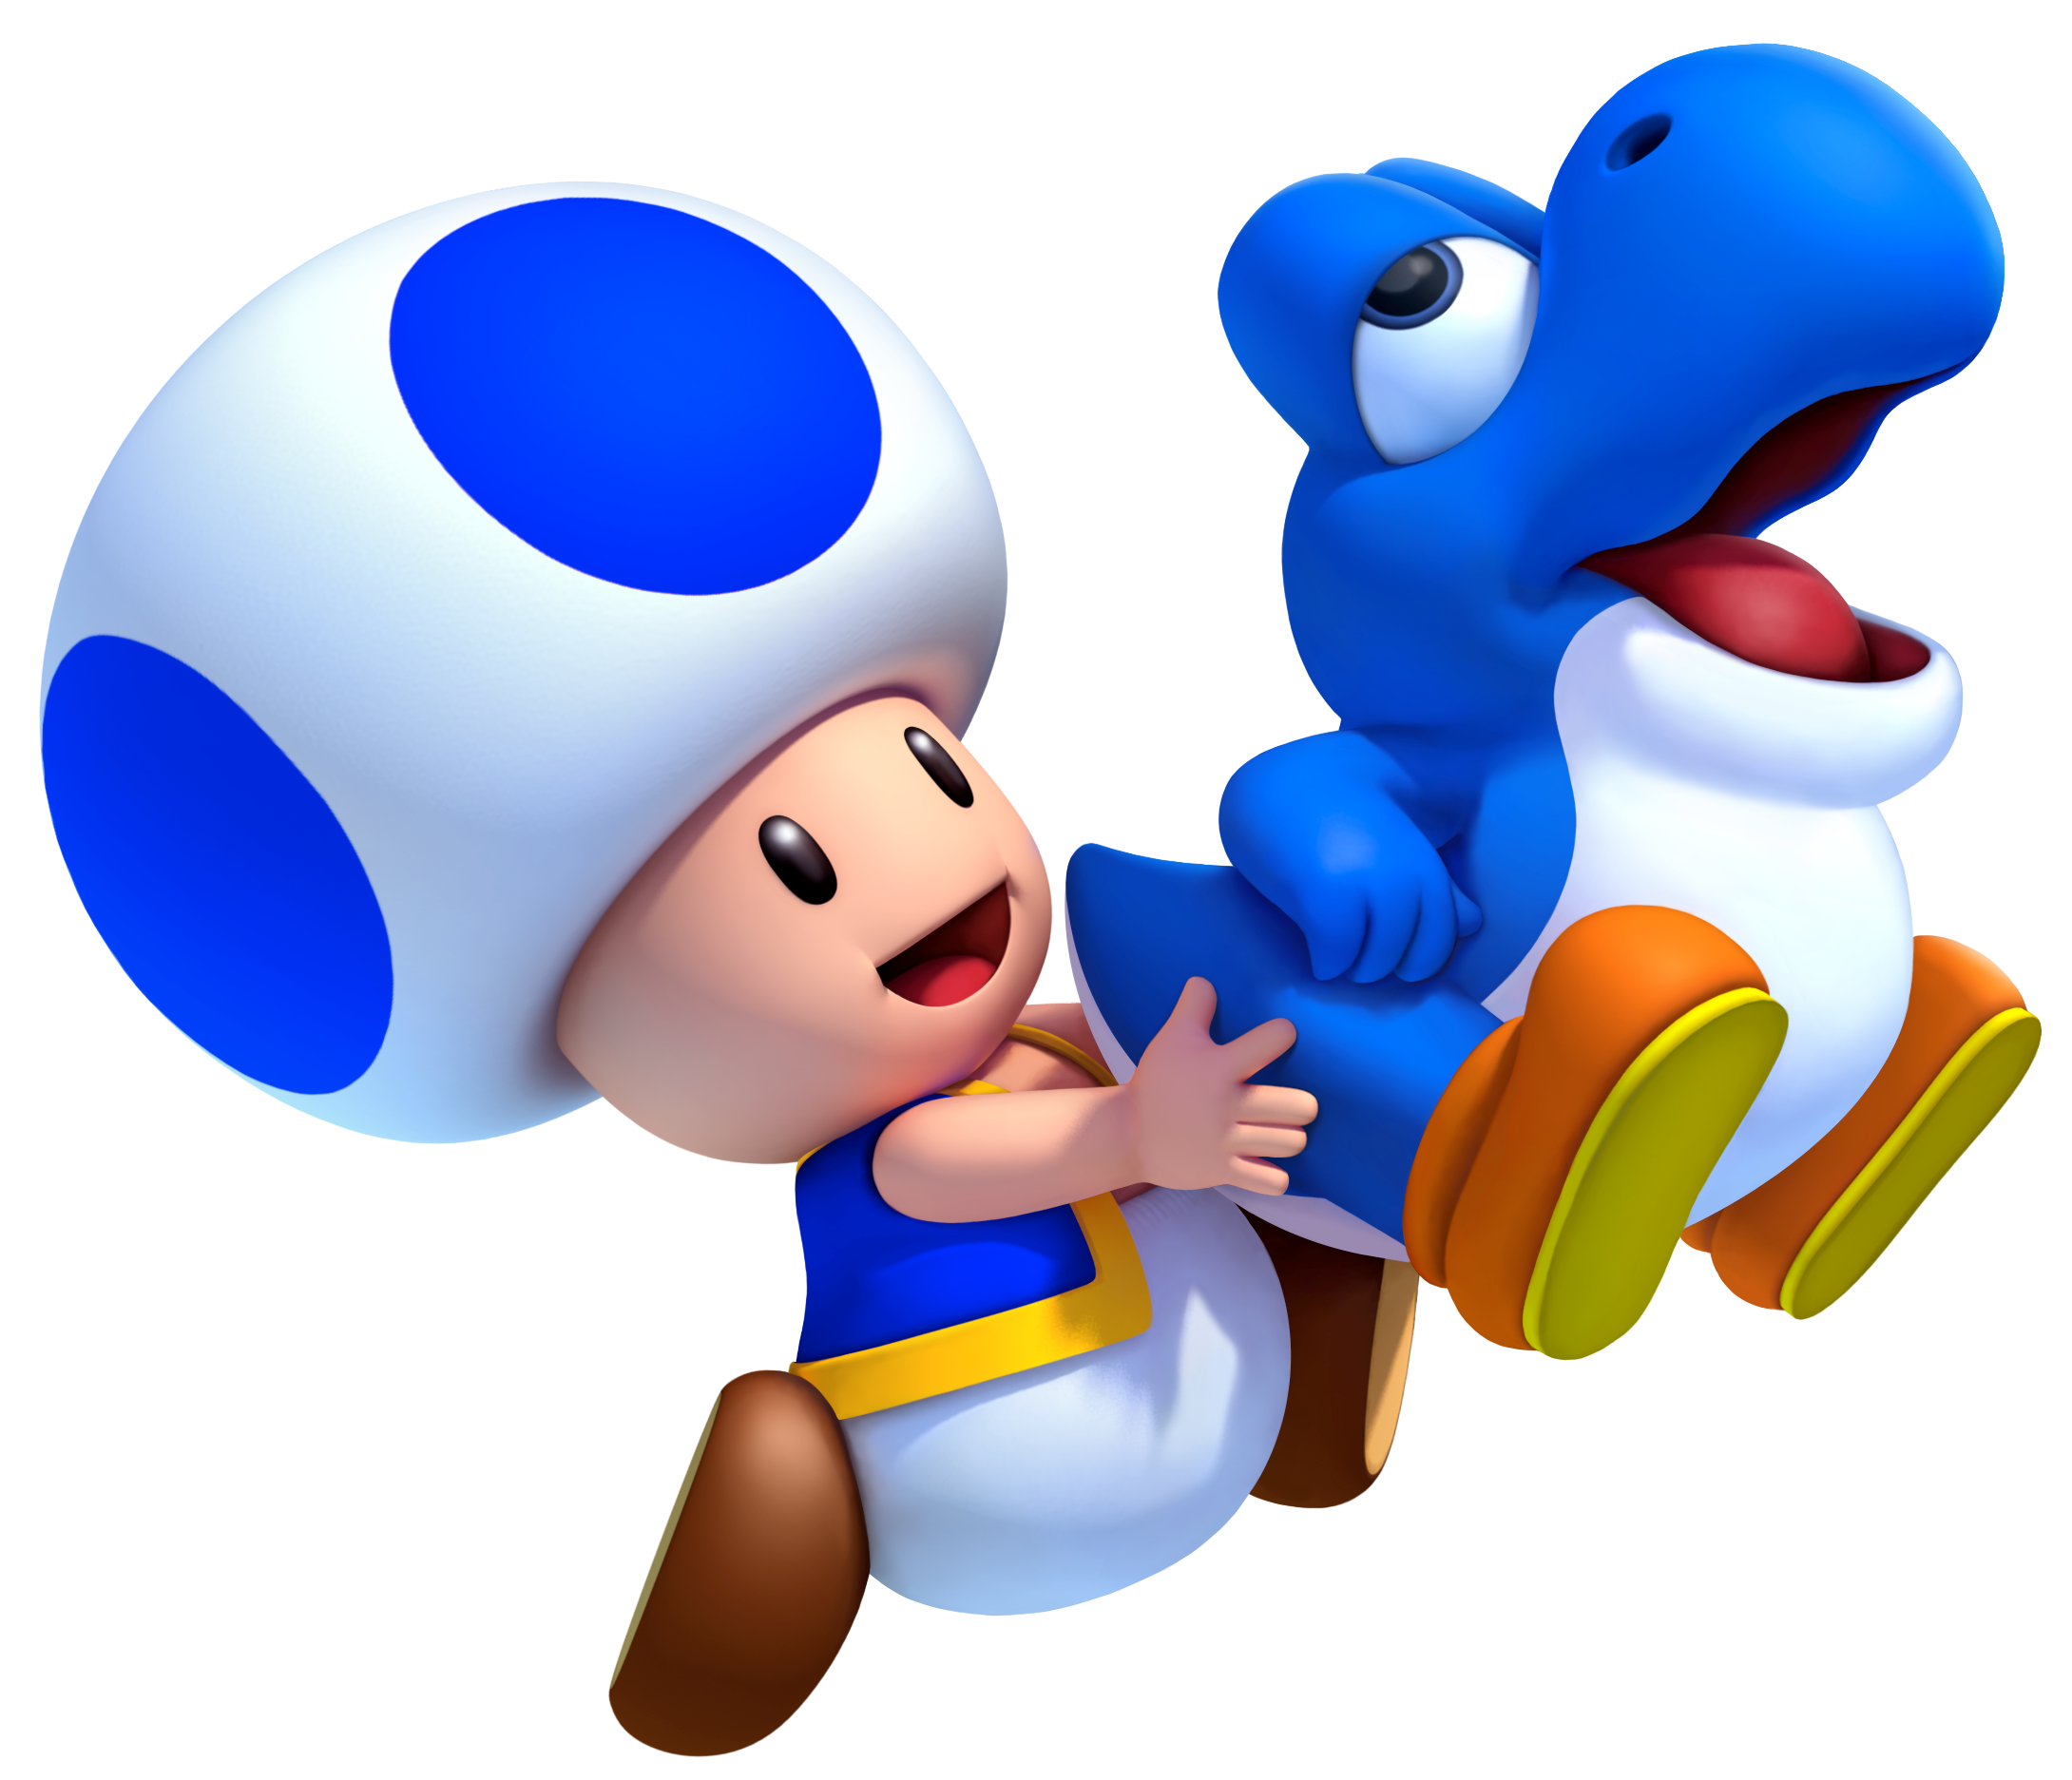 Baby_Yoshi_with_Blue_Toad.png